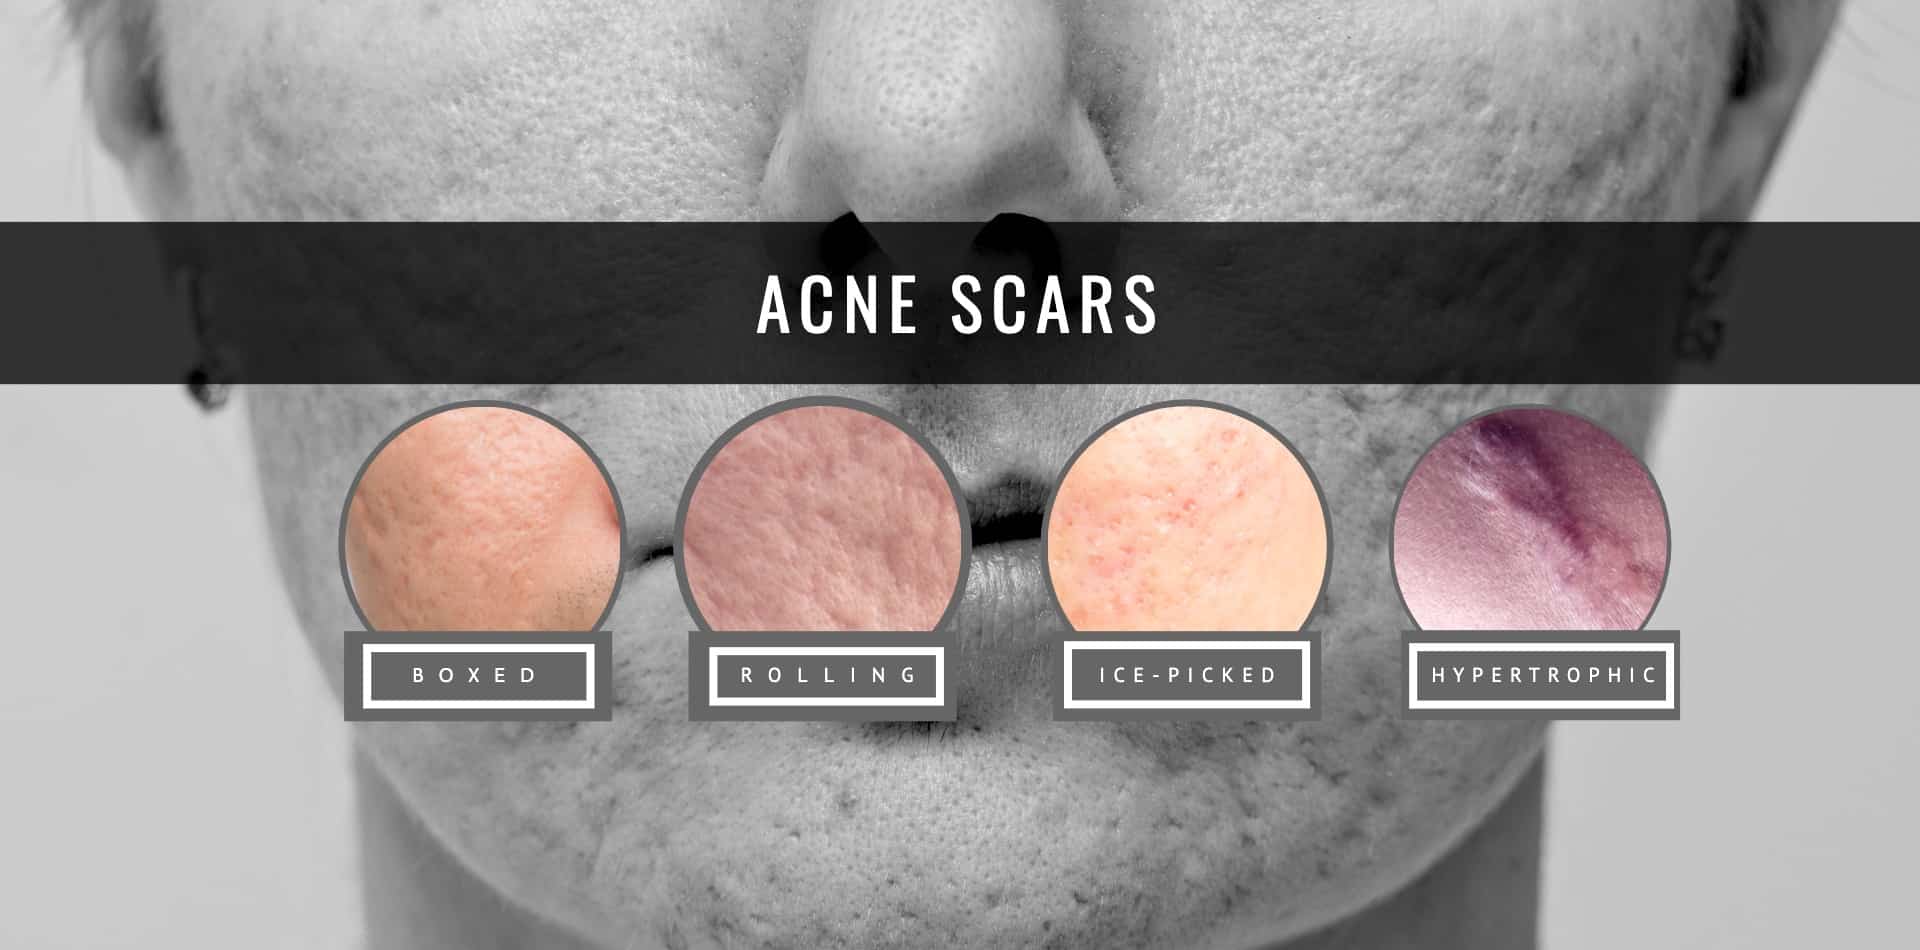 types of acne scars and the treatment and pimple scar removal